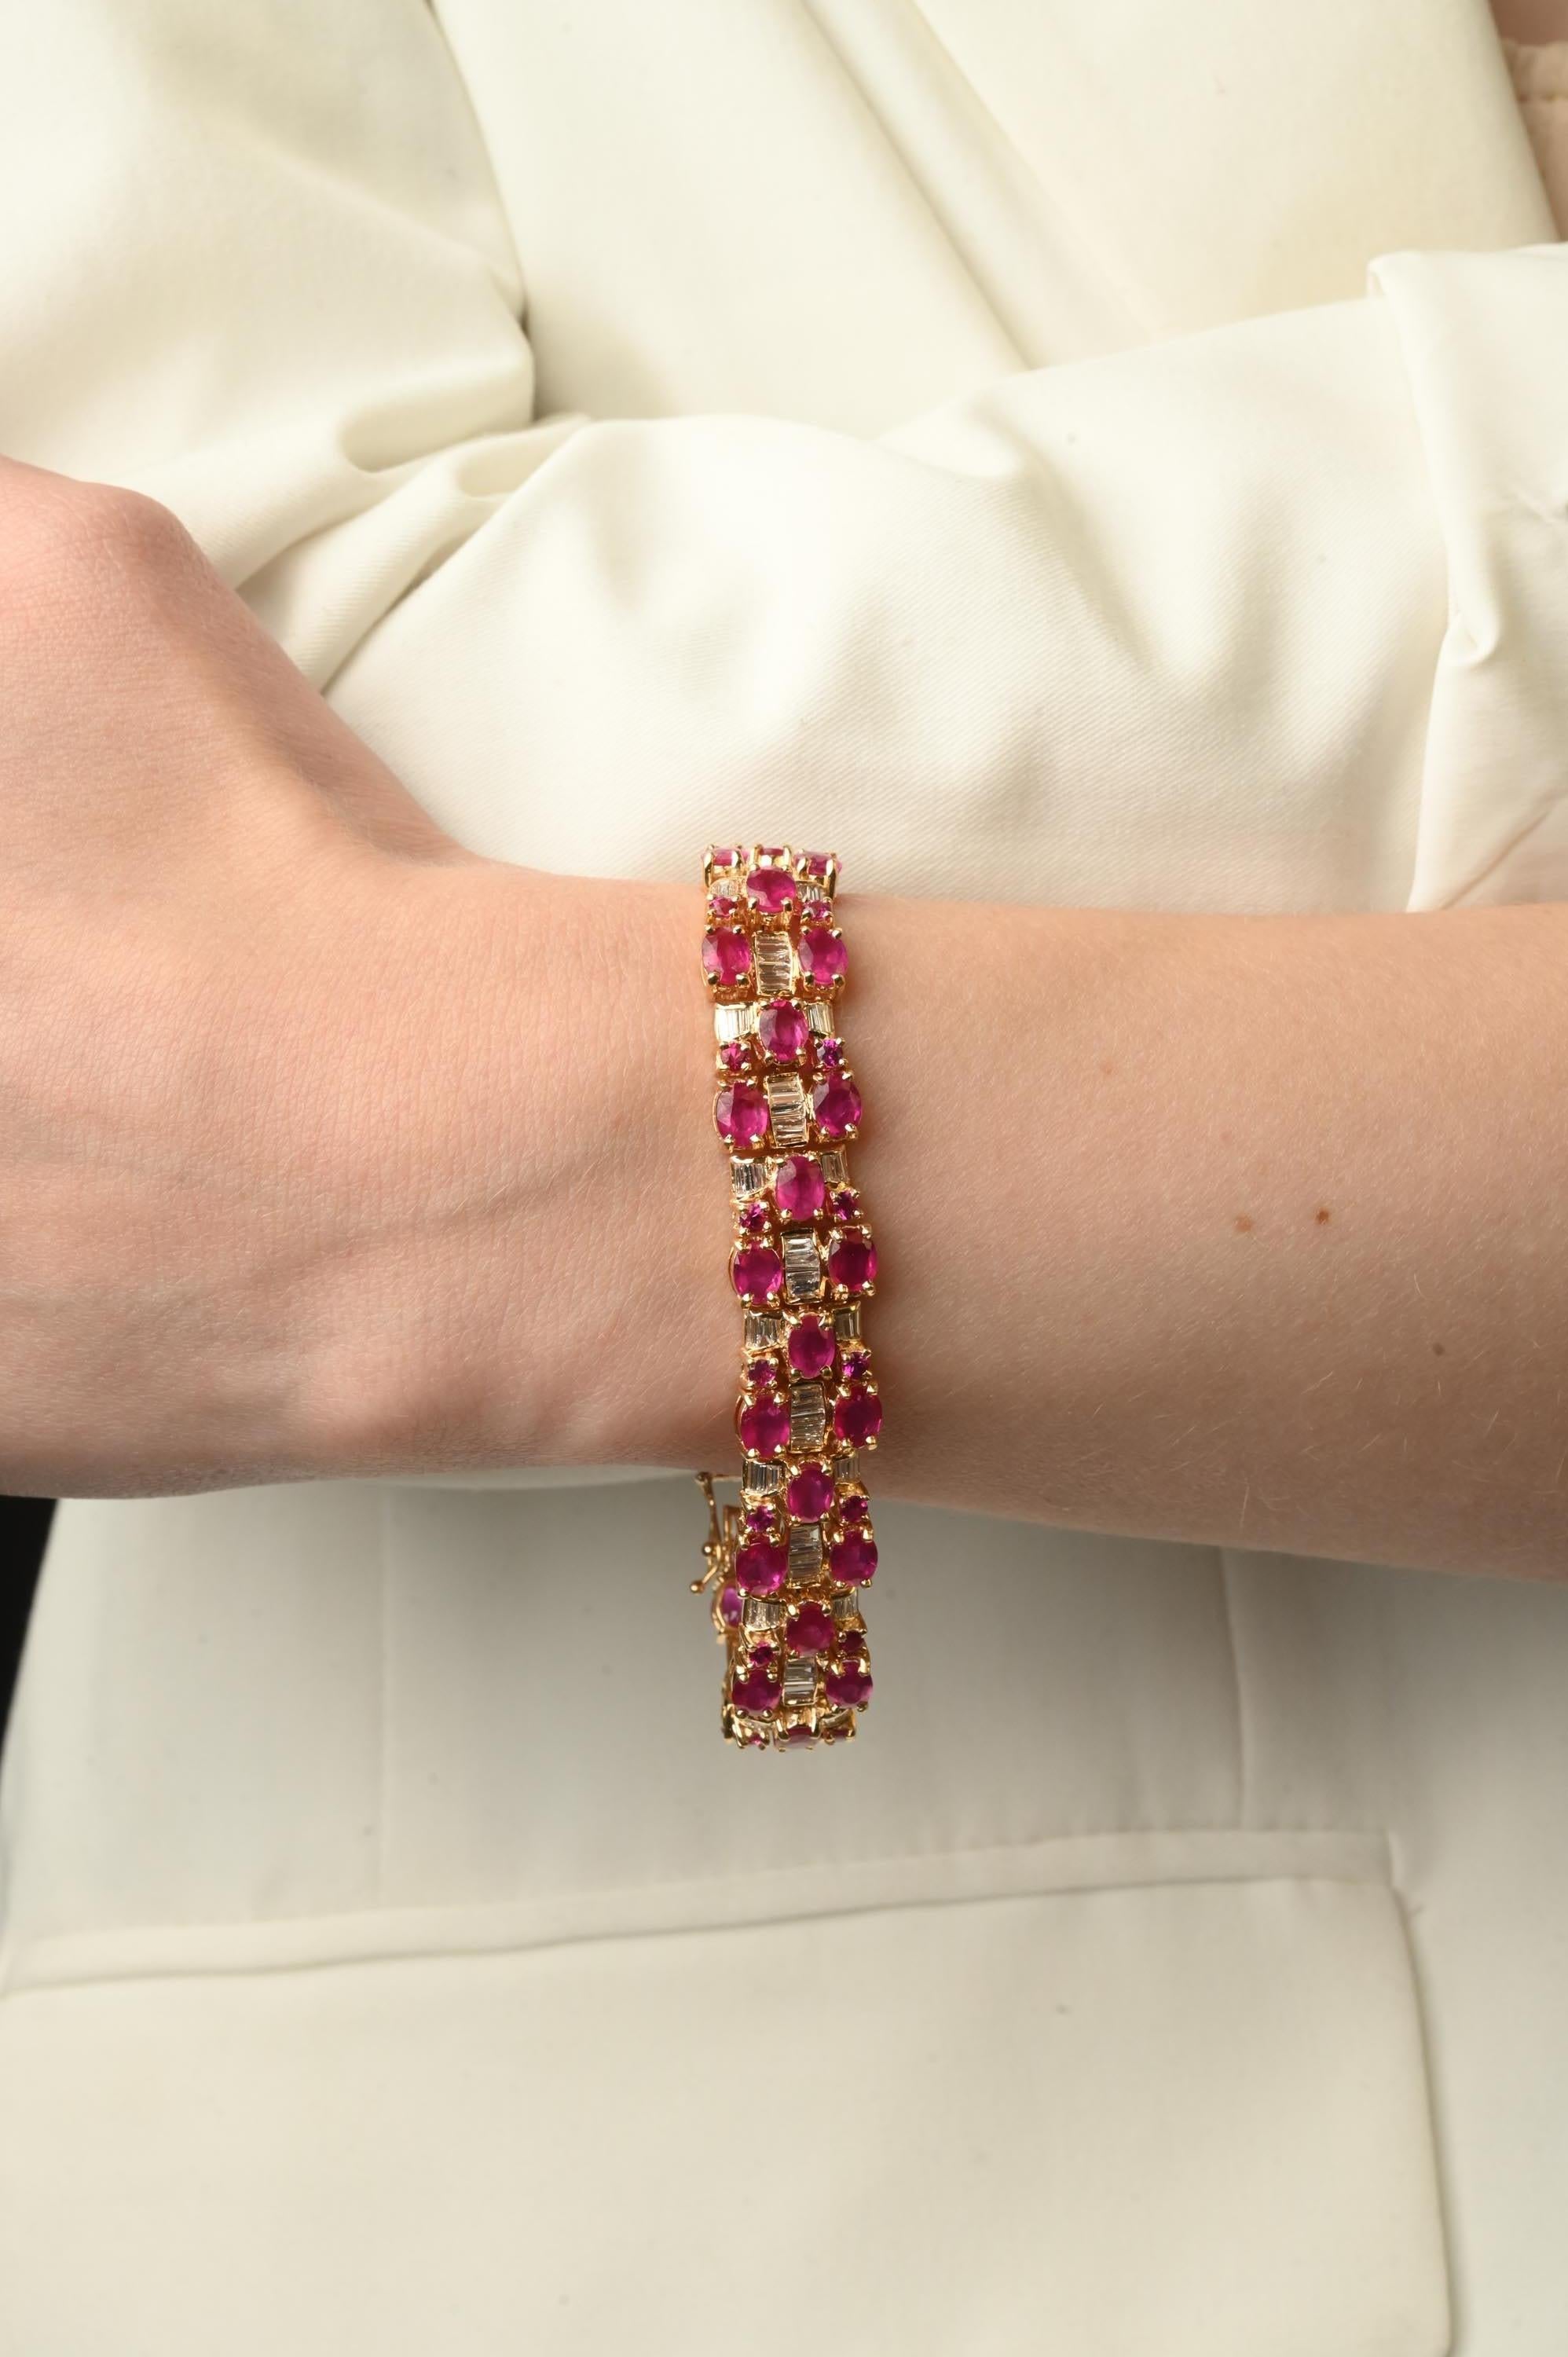 A bracelet is an essential piece of jewelry when it comes to your wedding day. The sleek and elegant style complements the attire beautifully, whether it's the bride wearing it herself, or as a gift to her bridesmaids to wear on the D’day.
Ruby and